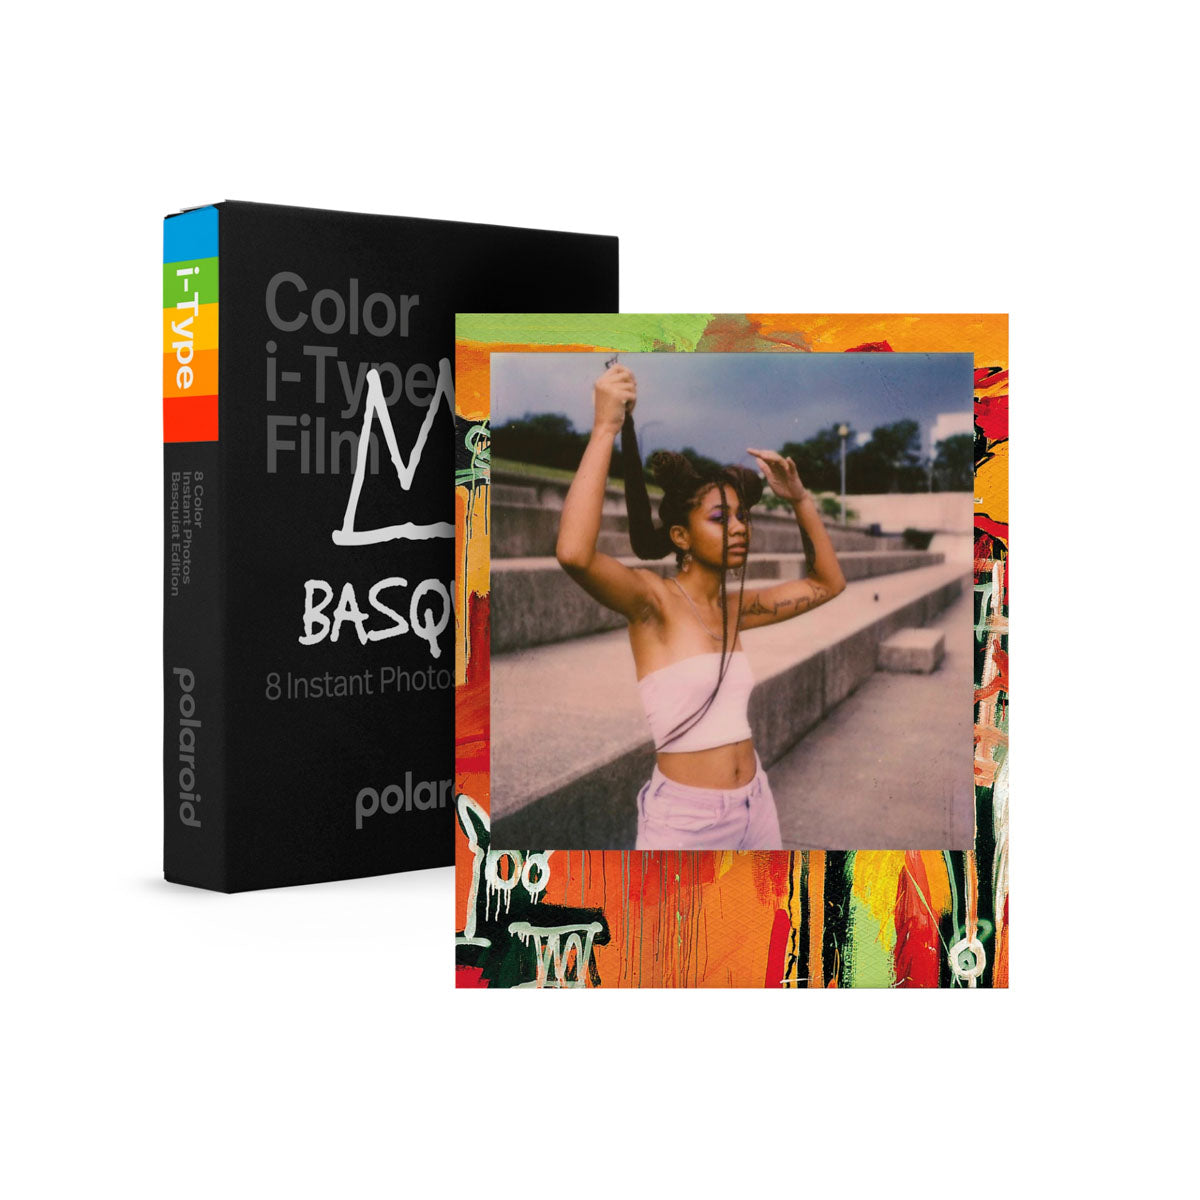 Polaroid - Color Film for i-Type Basquiat Edition dated stock 12/23